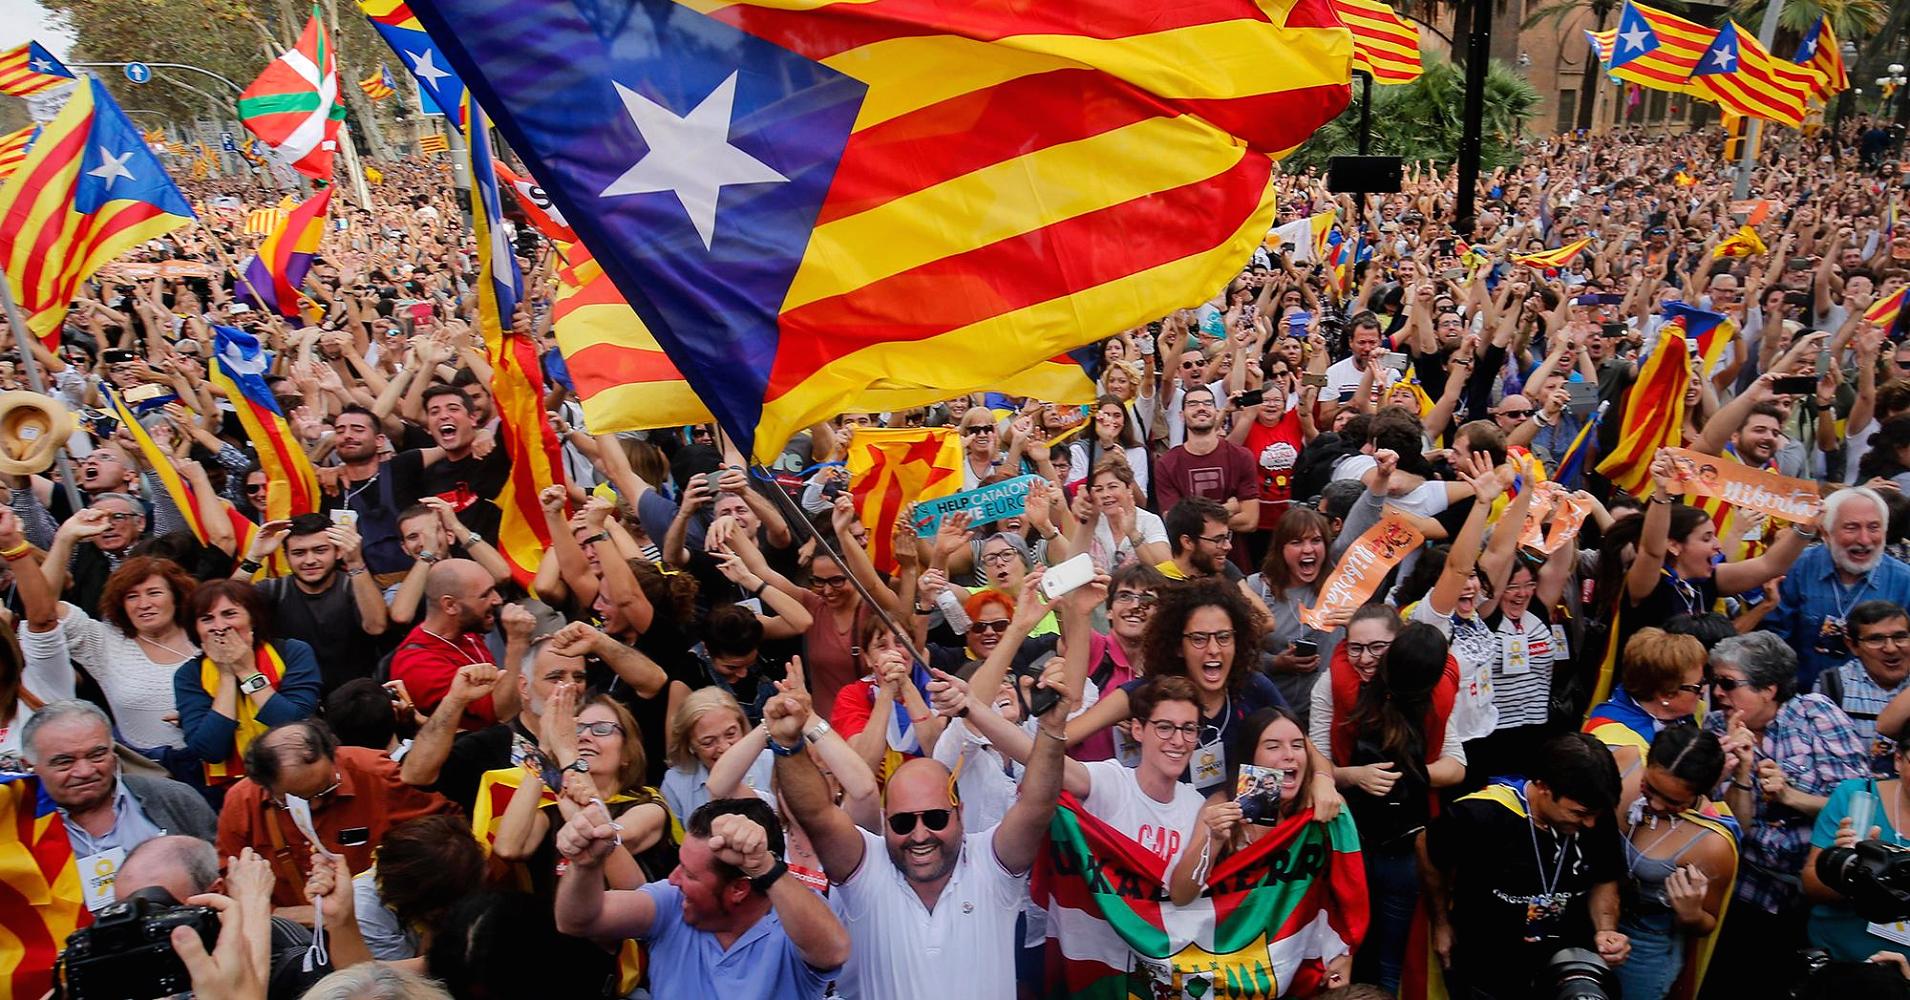 Catalonia's parliament voted to declare independence from Spain and proclaim a republic, just as Madrid is poised to impose direct rule on the region to stop it in its tracks.